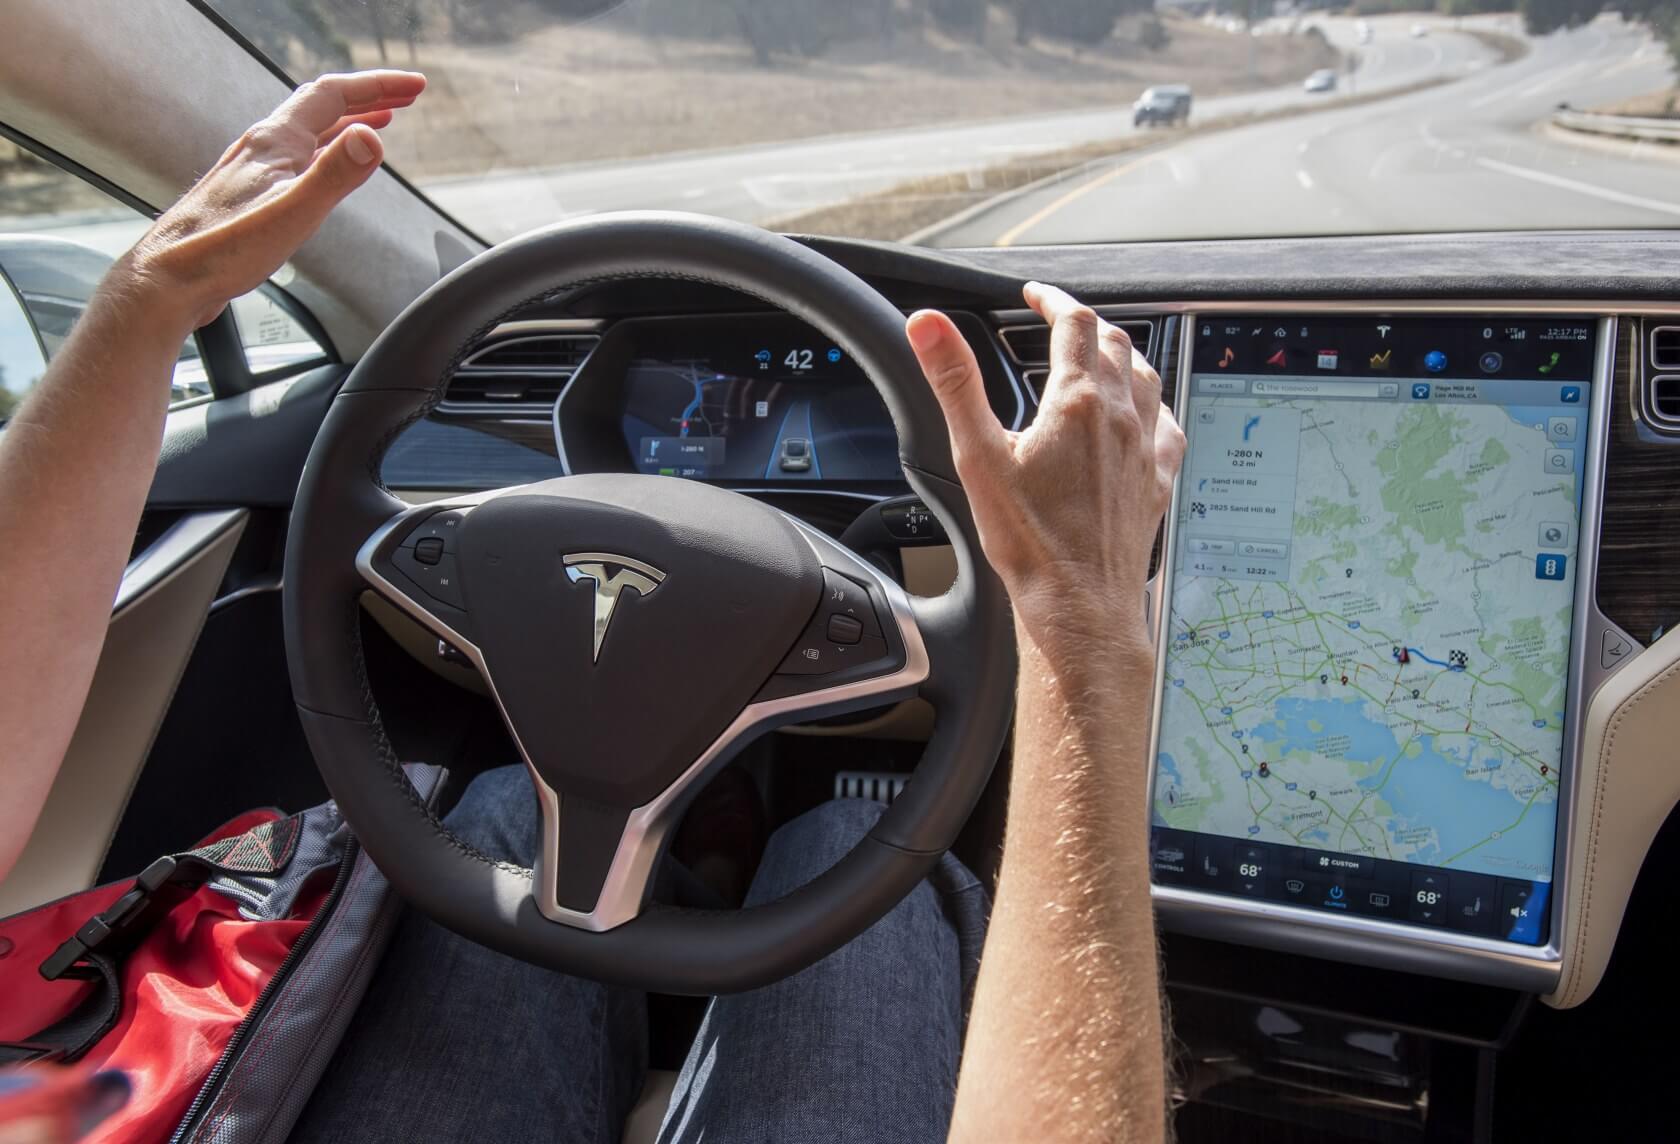 Tesla is raising the price of its 'Full Self-Driving' hardware by $1,000 on August 16